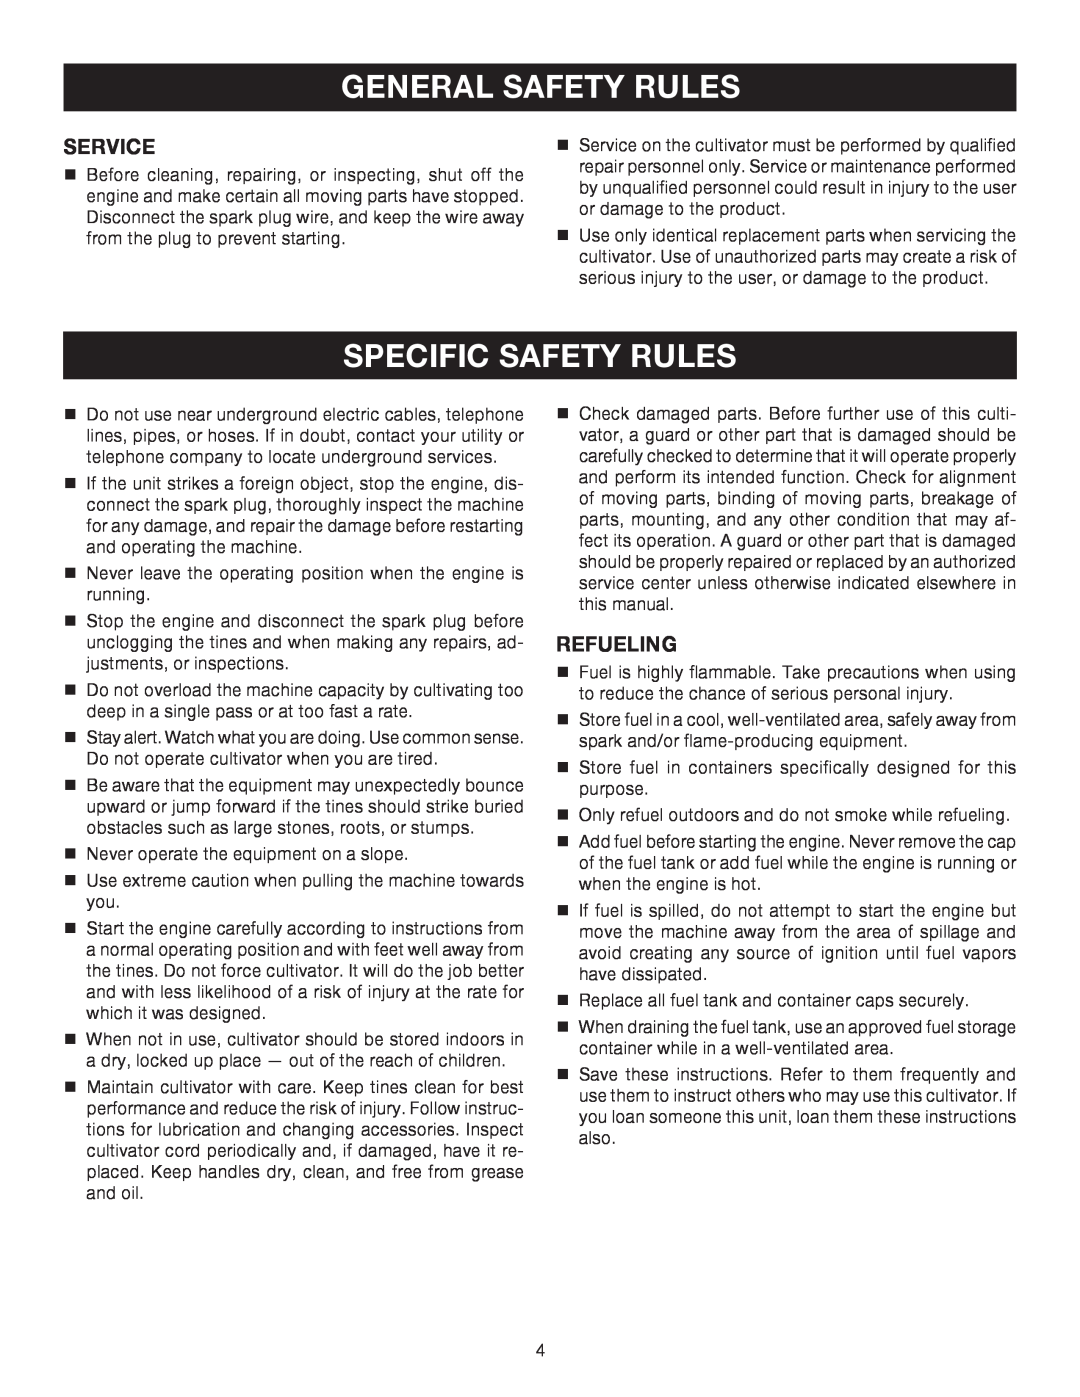 Ryobi RY60512 manual Specific Safety Rules, Service, Refueling, General Safety Rules 